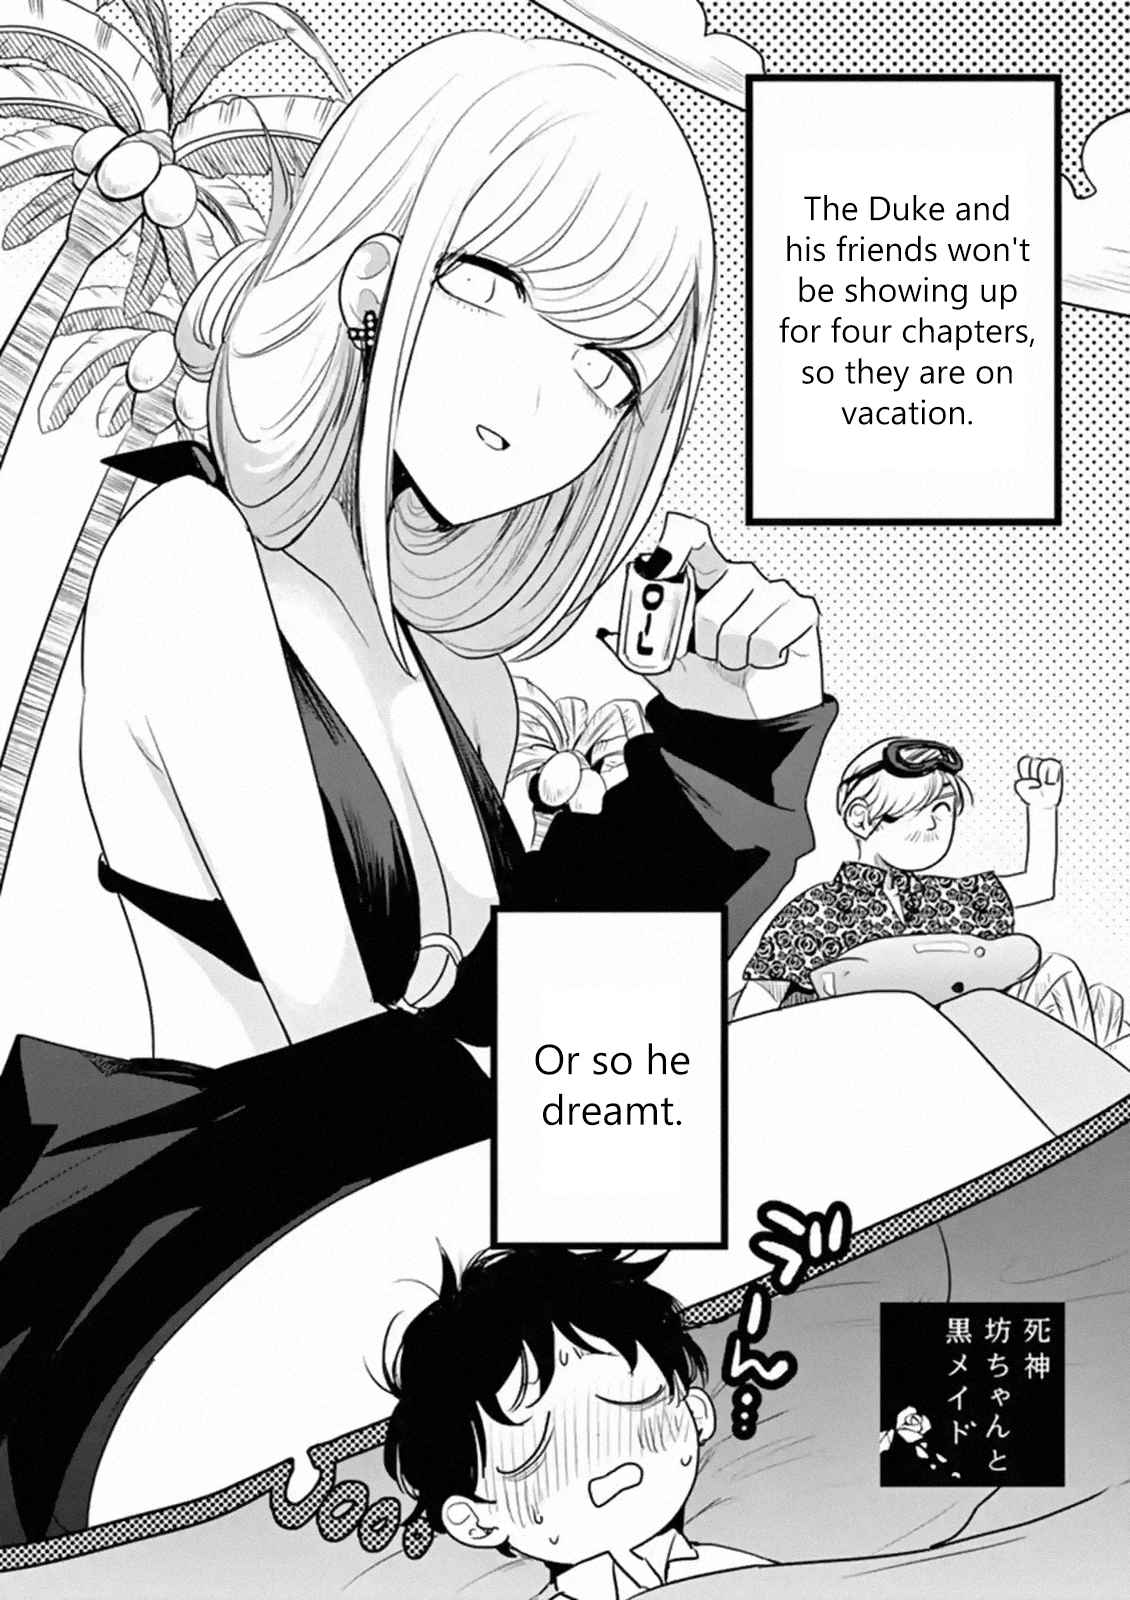 The Duke of Death and His Black Maid Vol. 9 Ch. 112 Separated